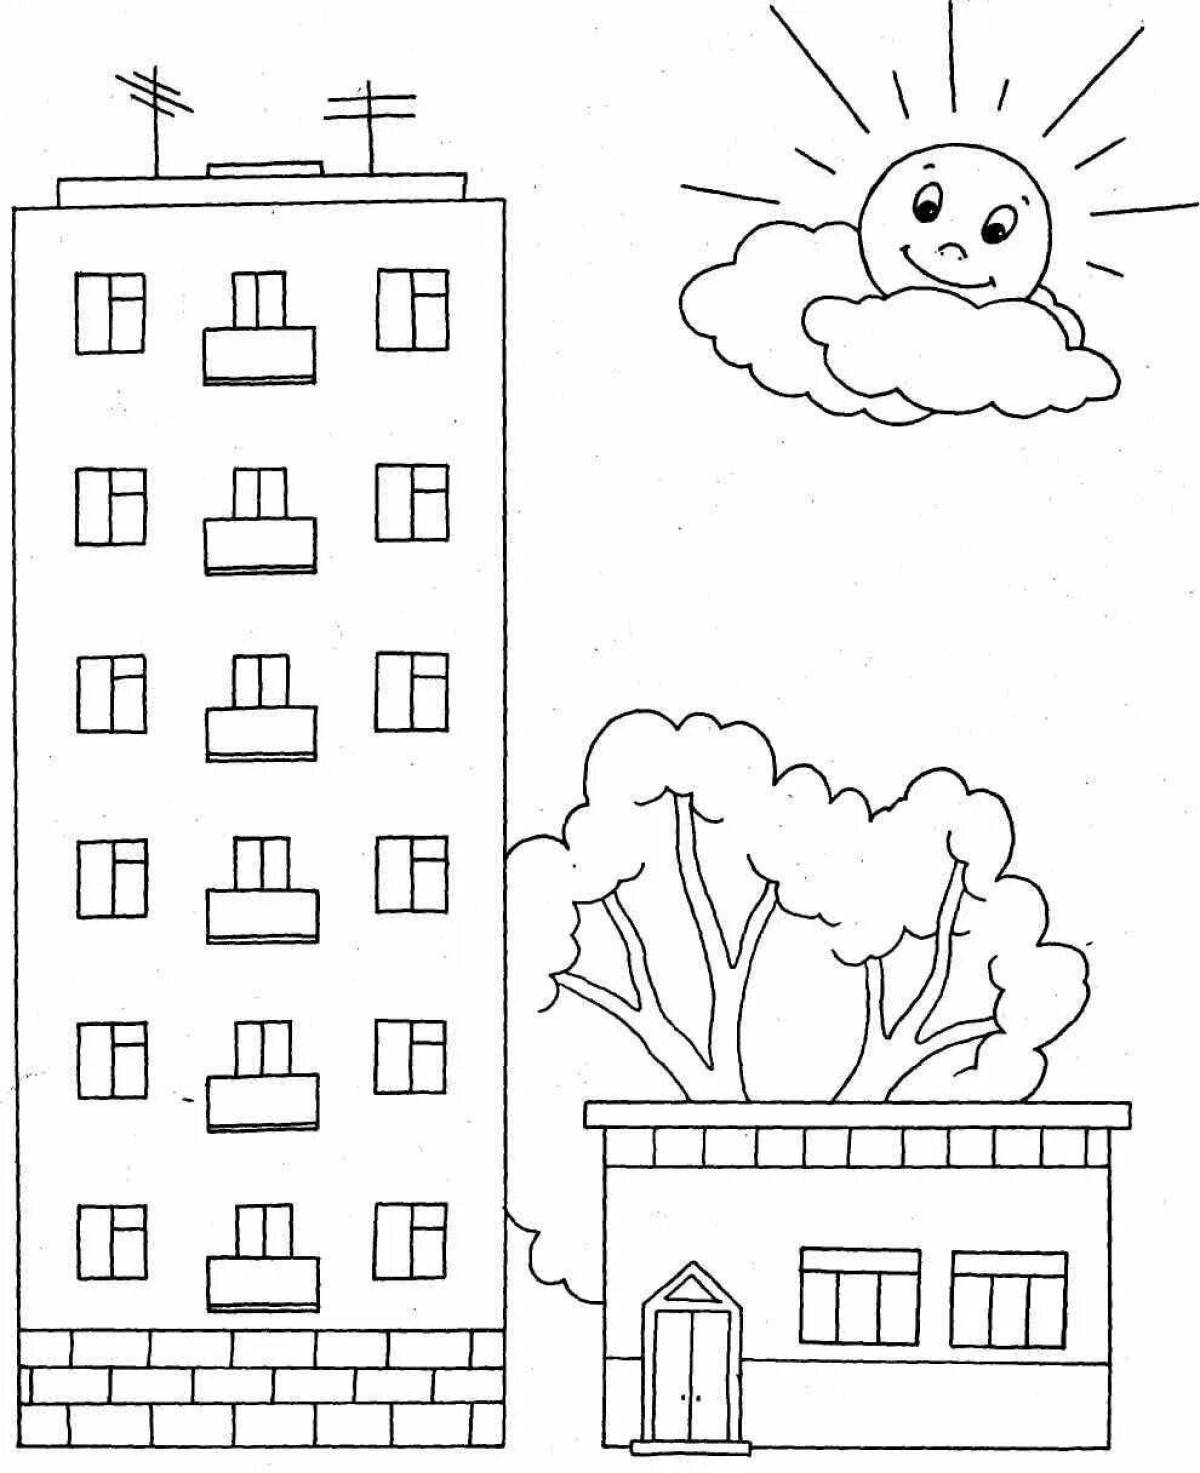 Exquisite high-rise building coloring page